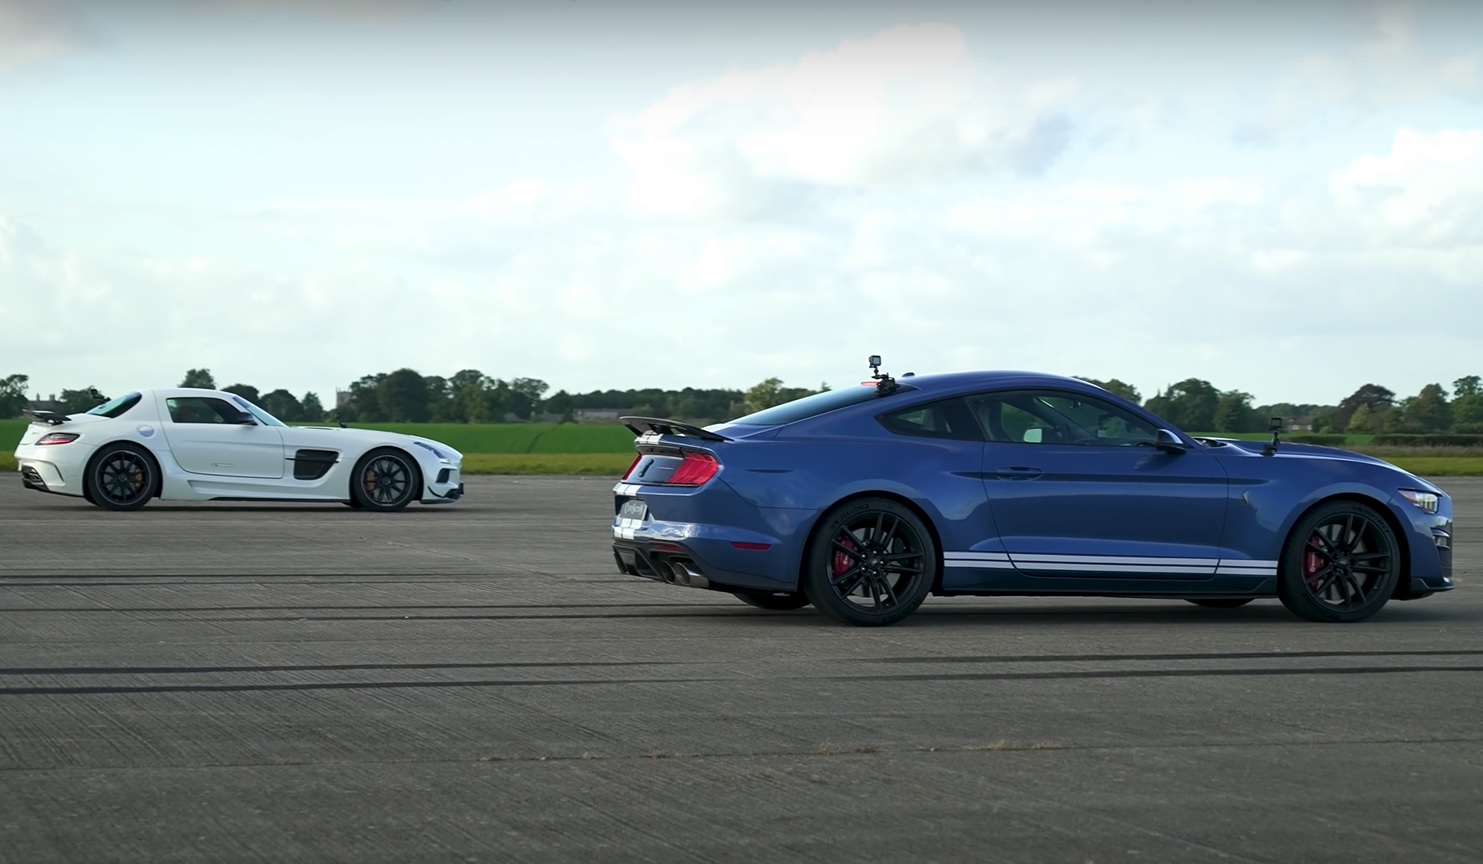 Mercedes-Benz SLS AMG Black Series Vs Mustang Shelby GT500 in a Drag Race